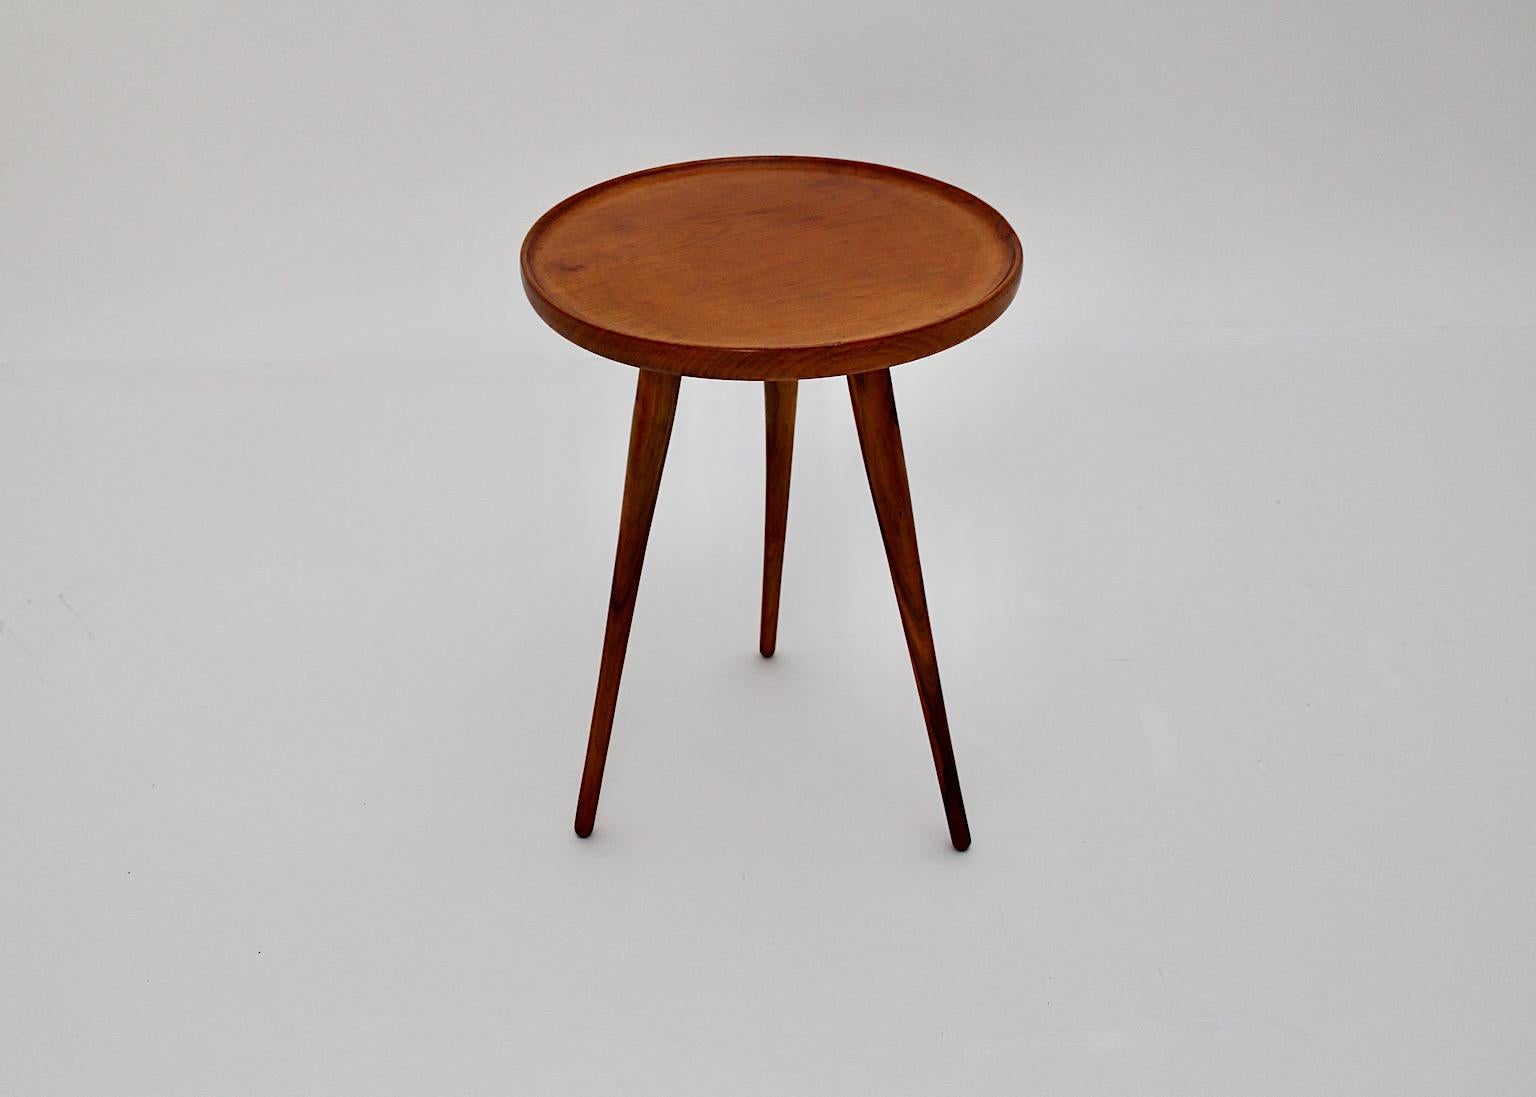 Mid-Century Modern vintage tiny side table or flower stand from walnut and solid beech in smoothly brown color 1950s Austria.
A charming side table or flower stand with three (3) feet and a circular plate with a bent upwards trim.
This amazing